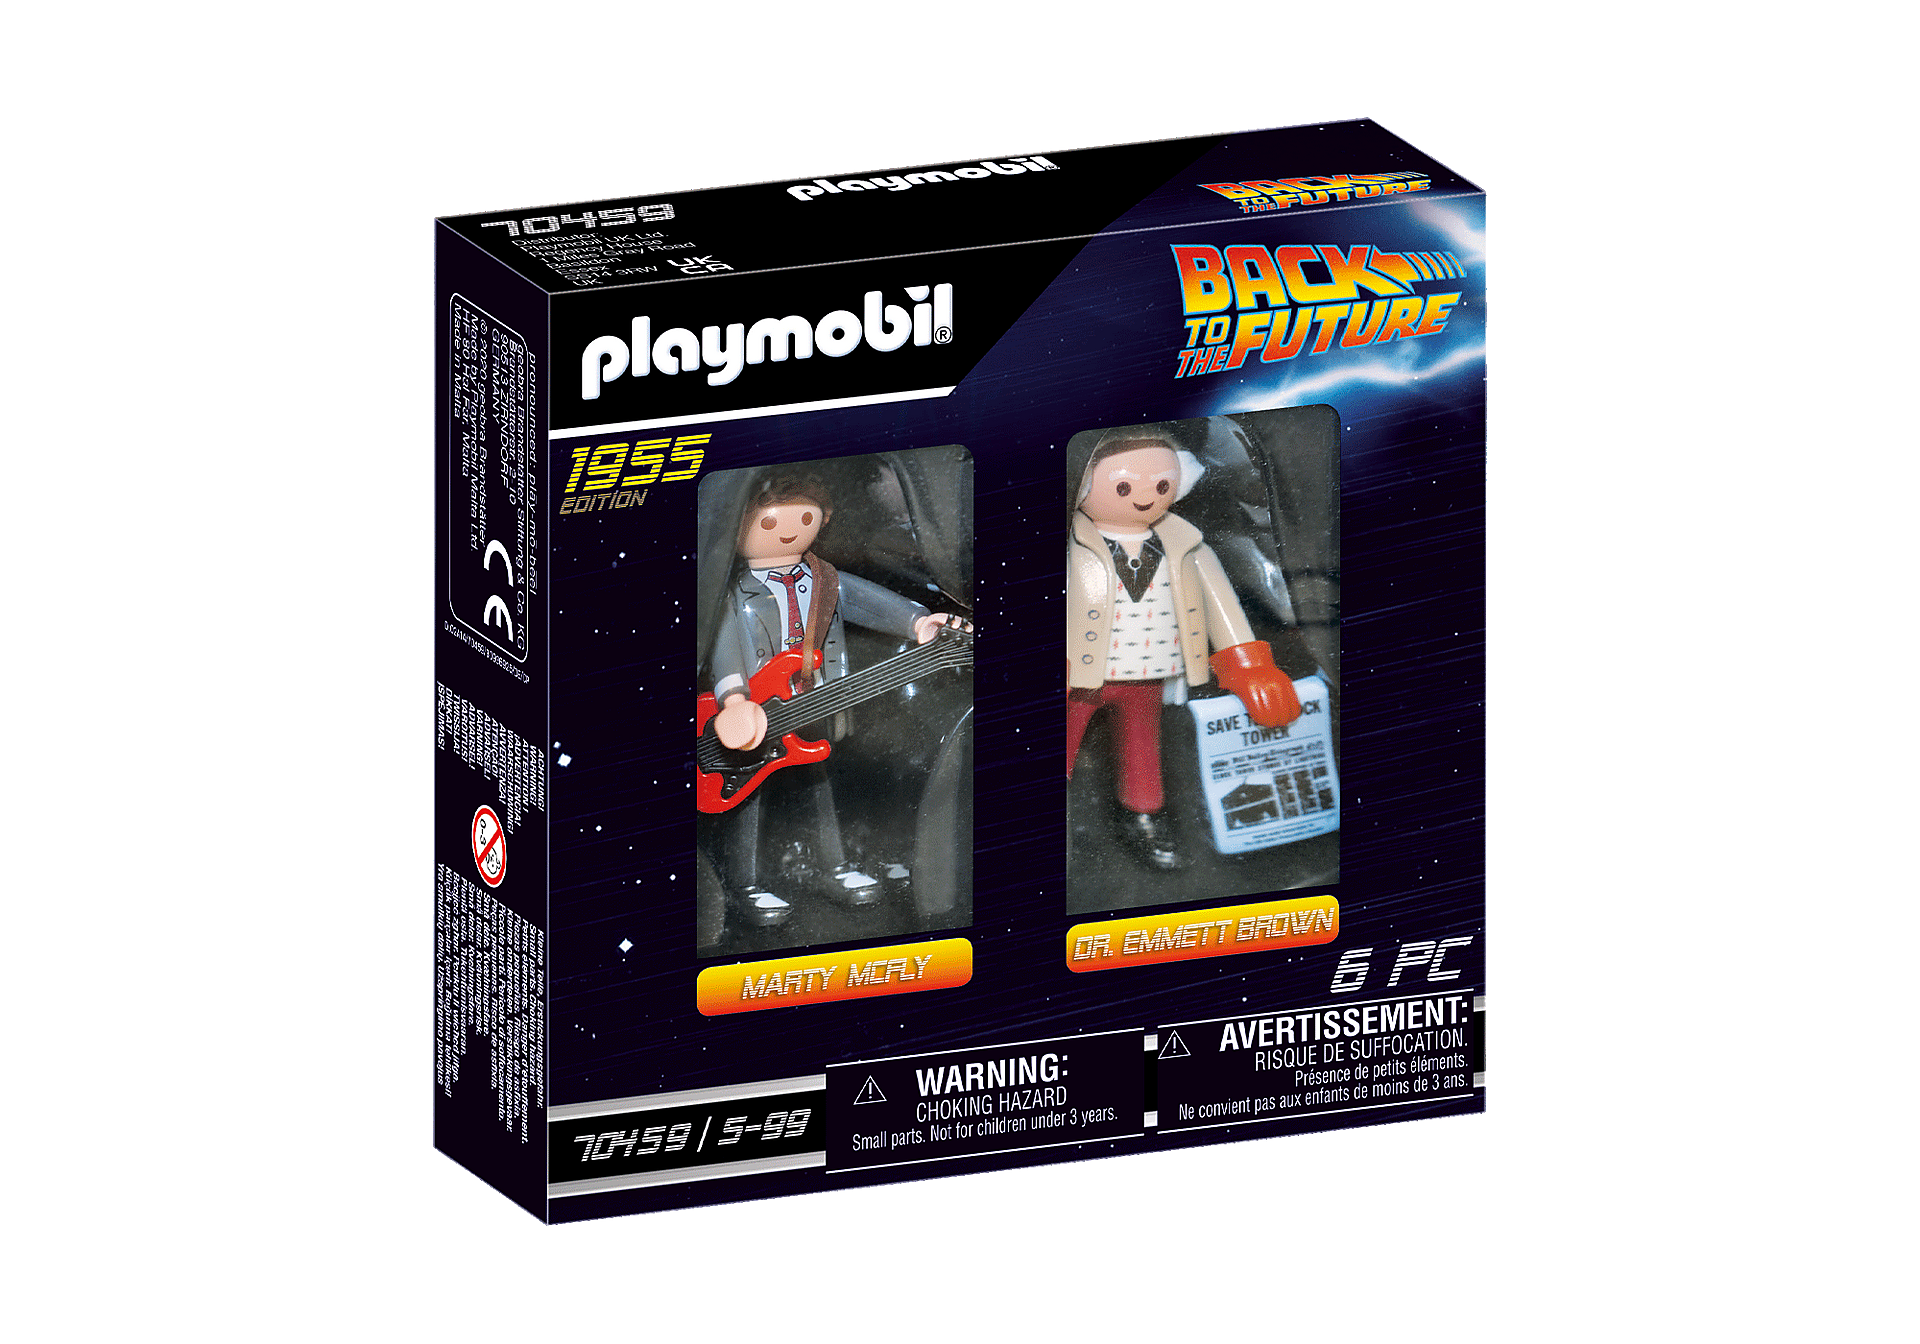 70459 Back to the Future Marty Mcfly and Dr. Emmett Brown zoom image2